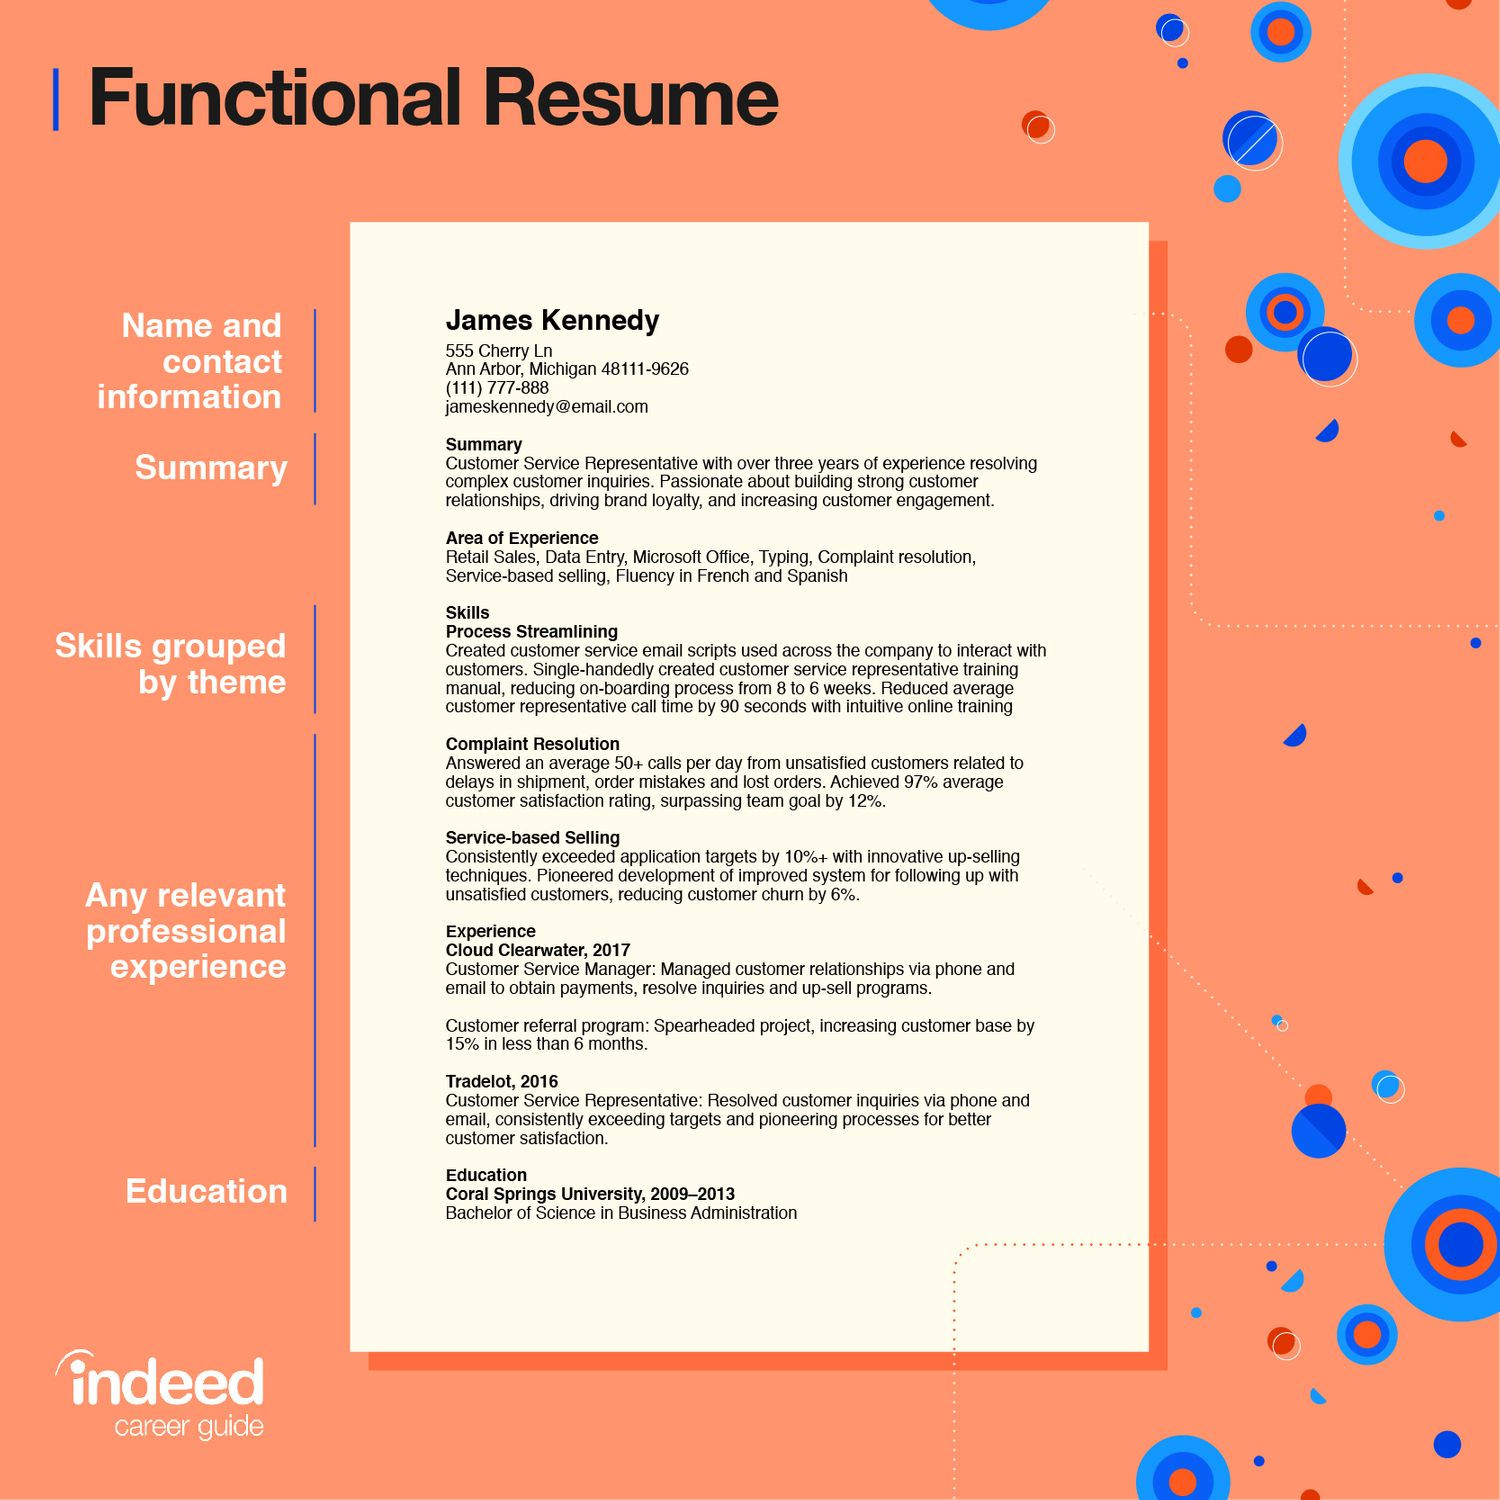 Business Analyst Non It Sample Resume Indeed top Resume formats: Tips and Examples Of 3 Common Resumes Indeed.com